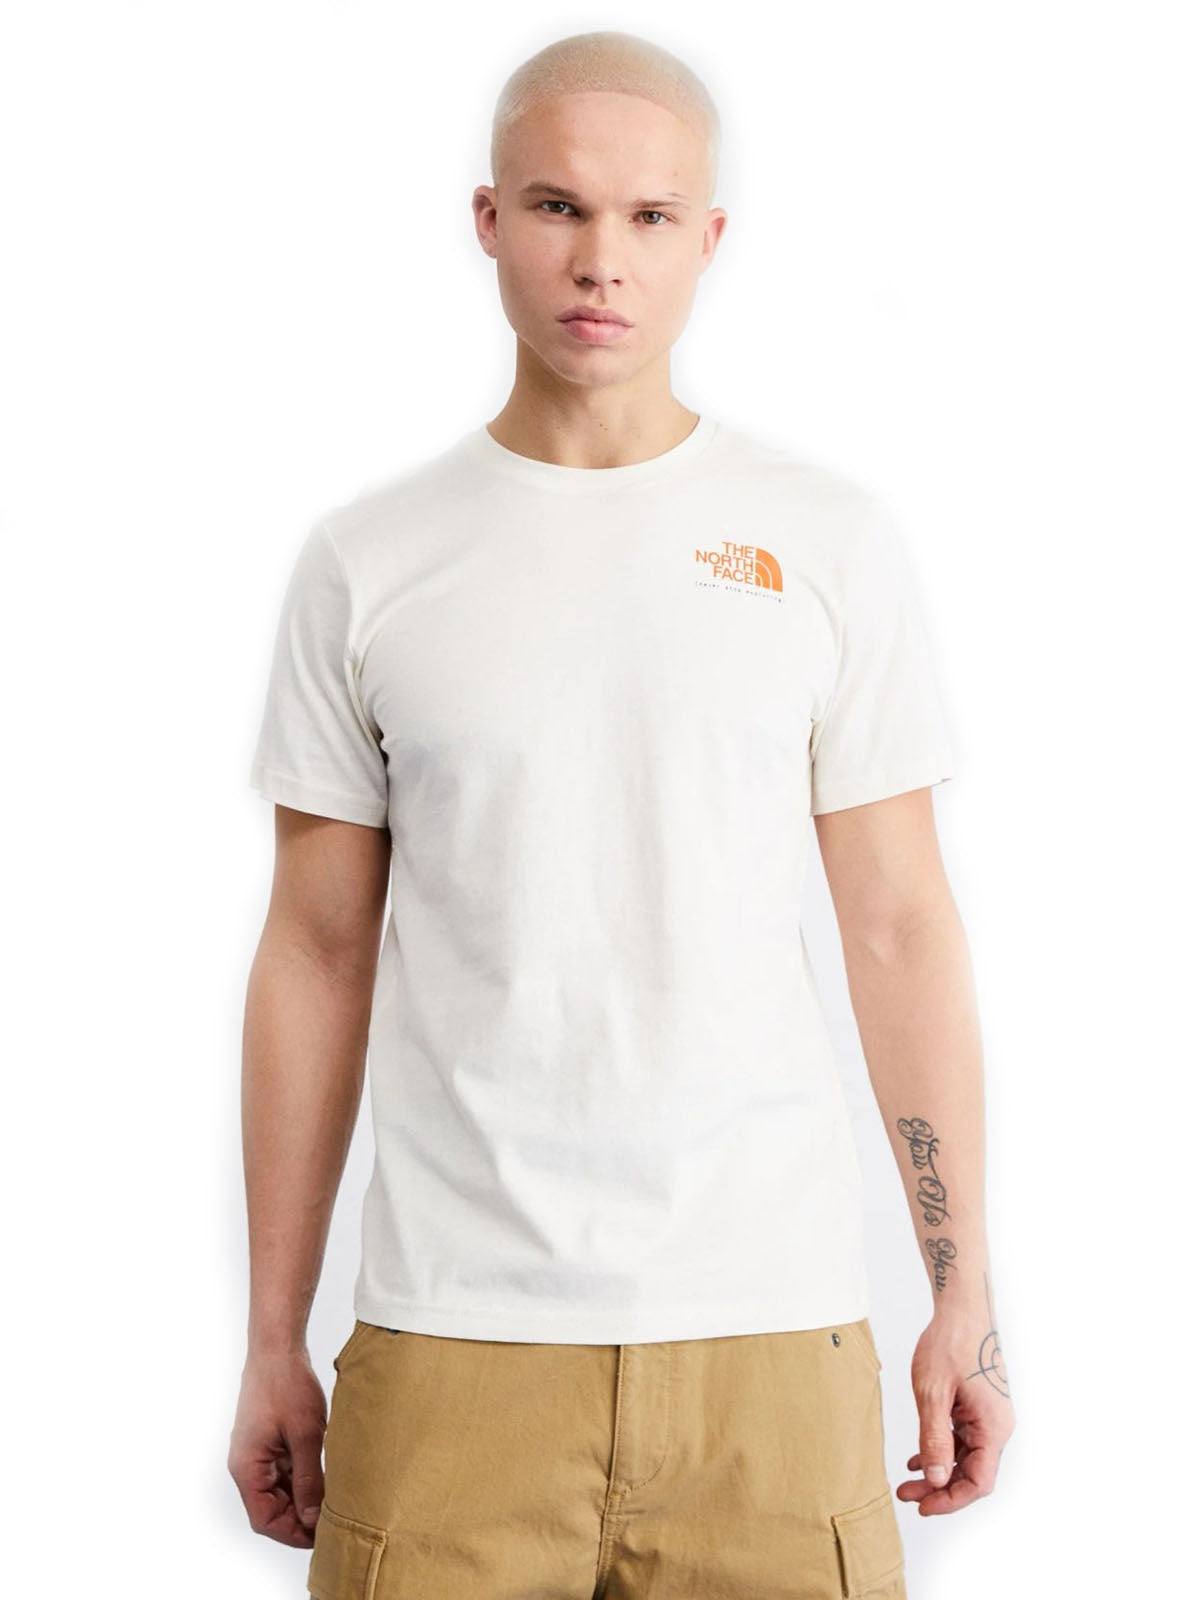 T-shirt Uomo The North Face - Graphic 3 T-Shirt - Bianco